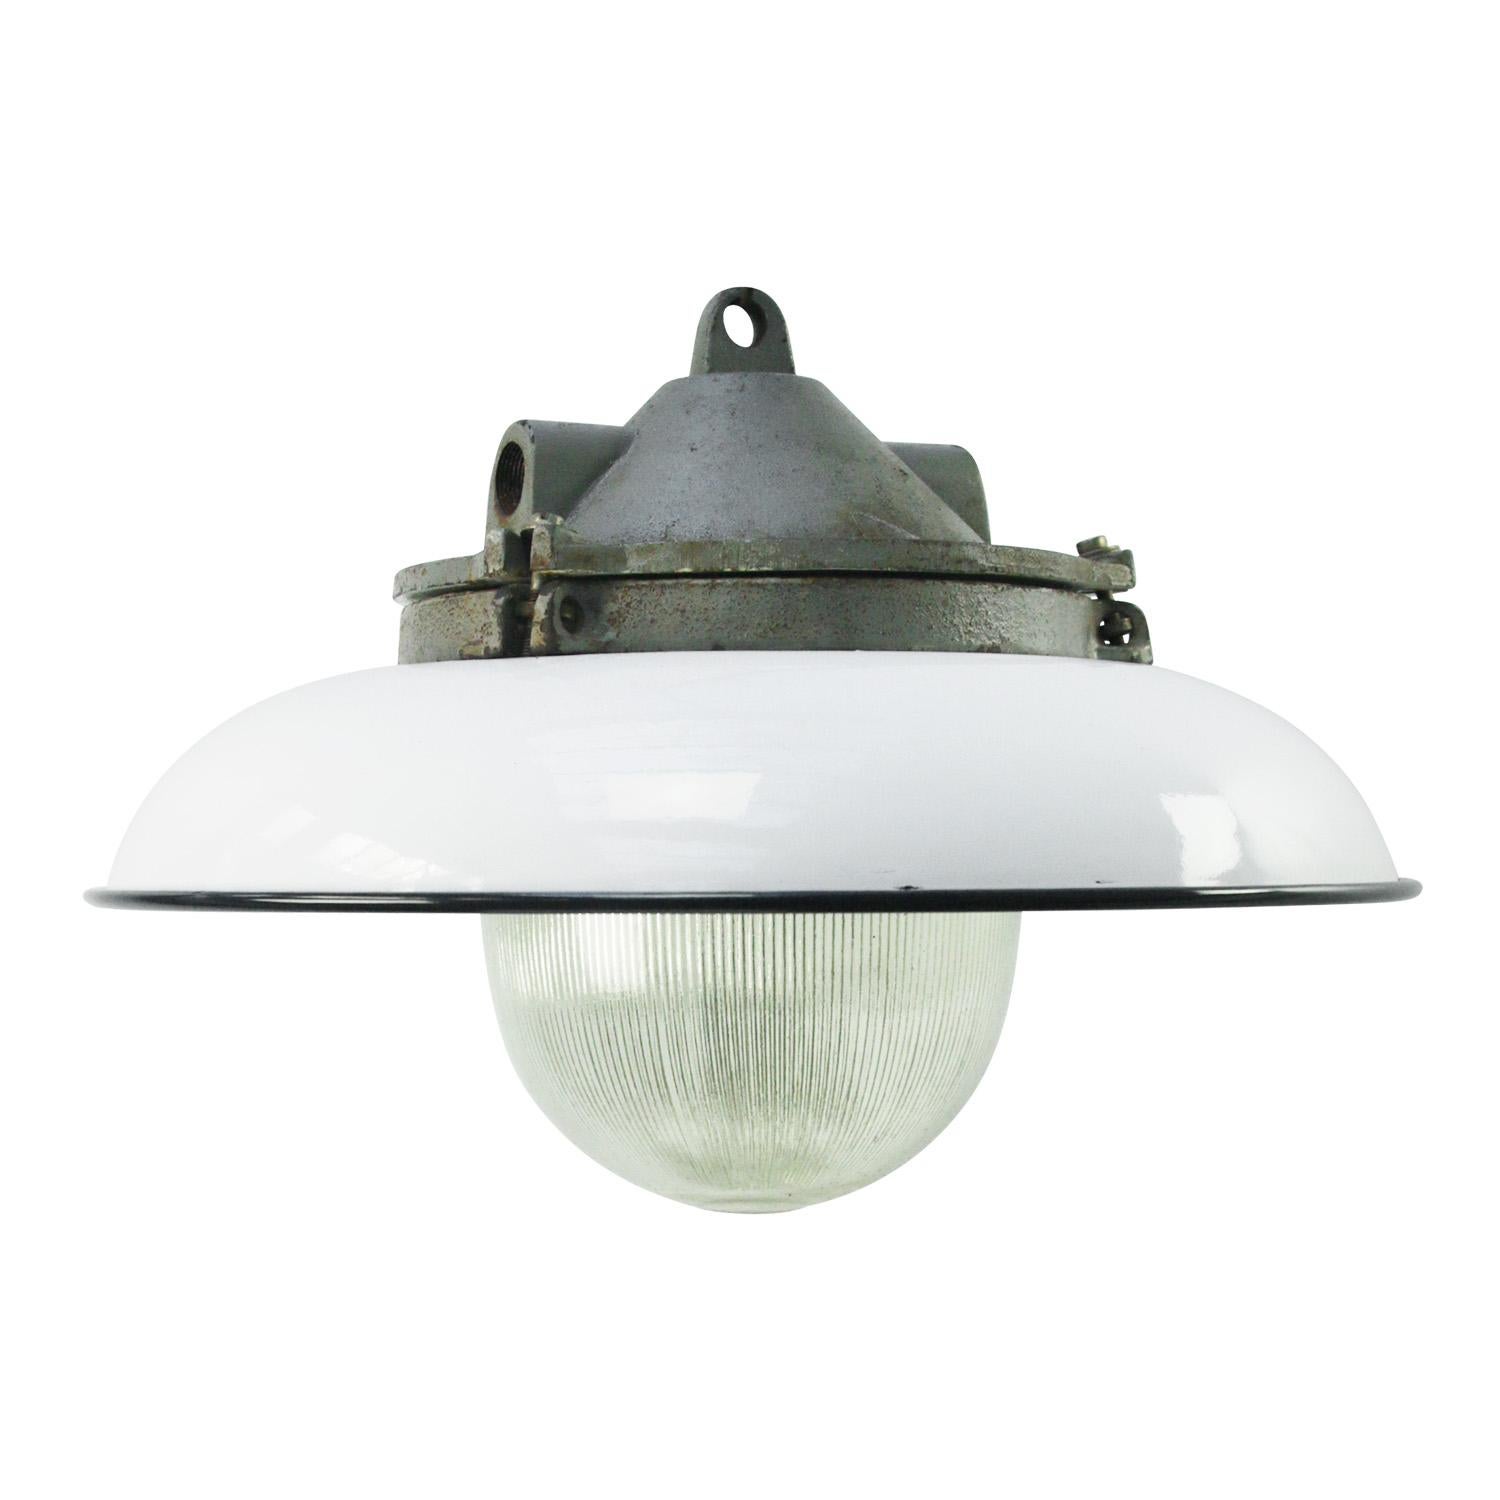 Industrial factory pendant. White enamel shade. Cast iron top. Striped glass.

Weight: 6.0 kg / 13.2 lb

Priced per individual item. All lamps have been made suitable by international standards for incandescent light bulbs, energy-efficient and LED